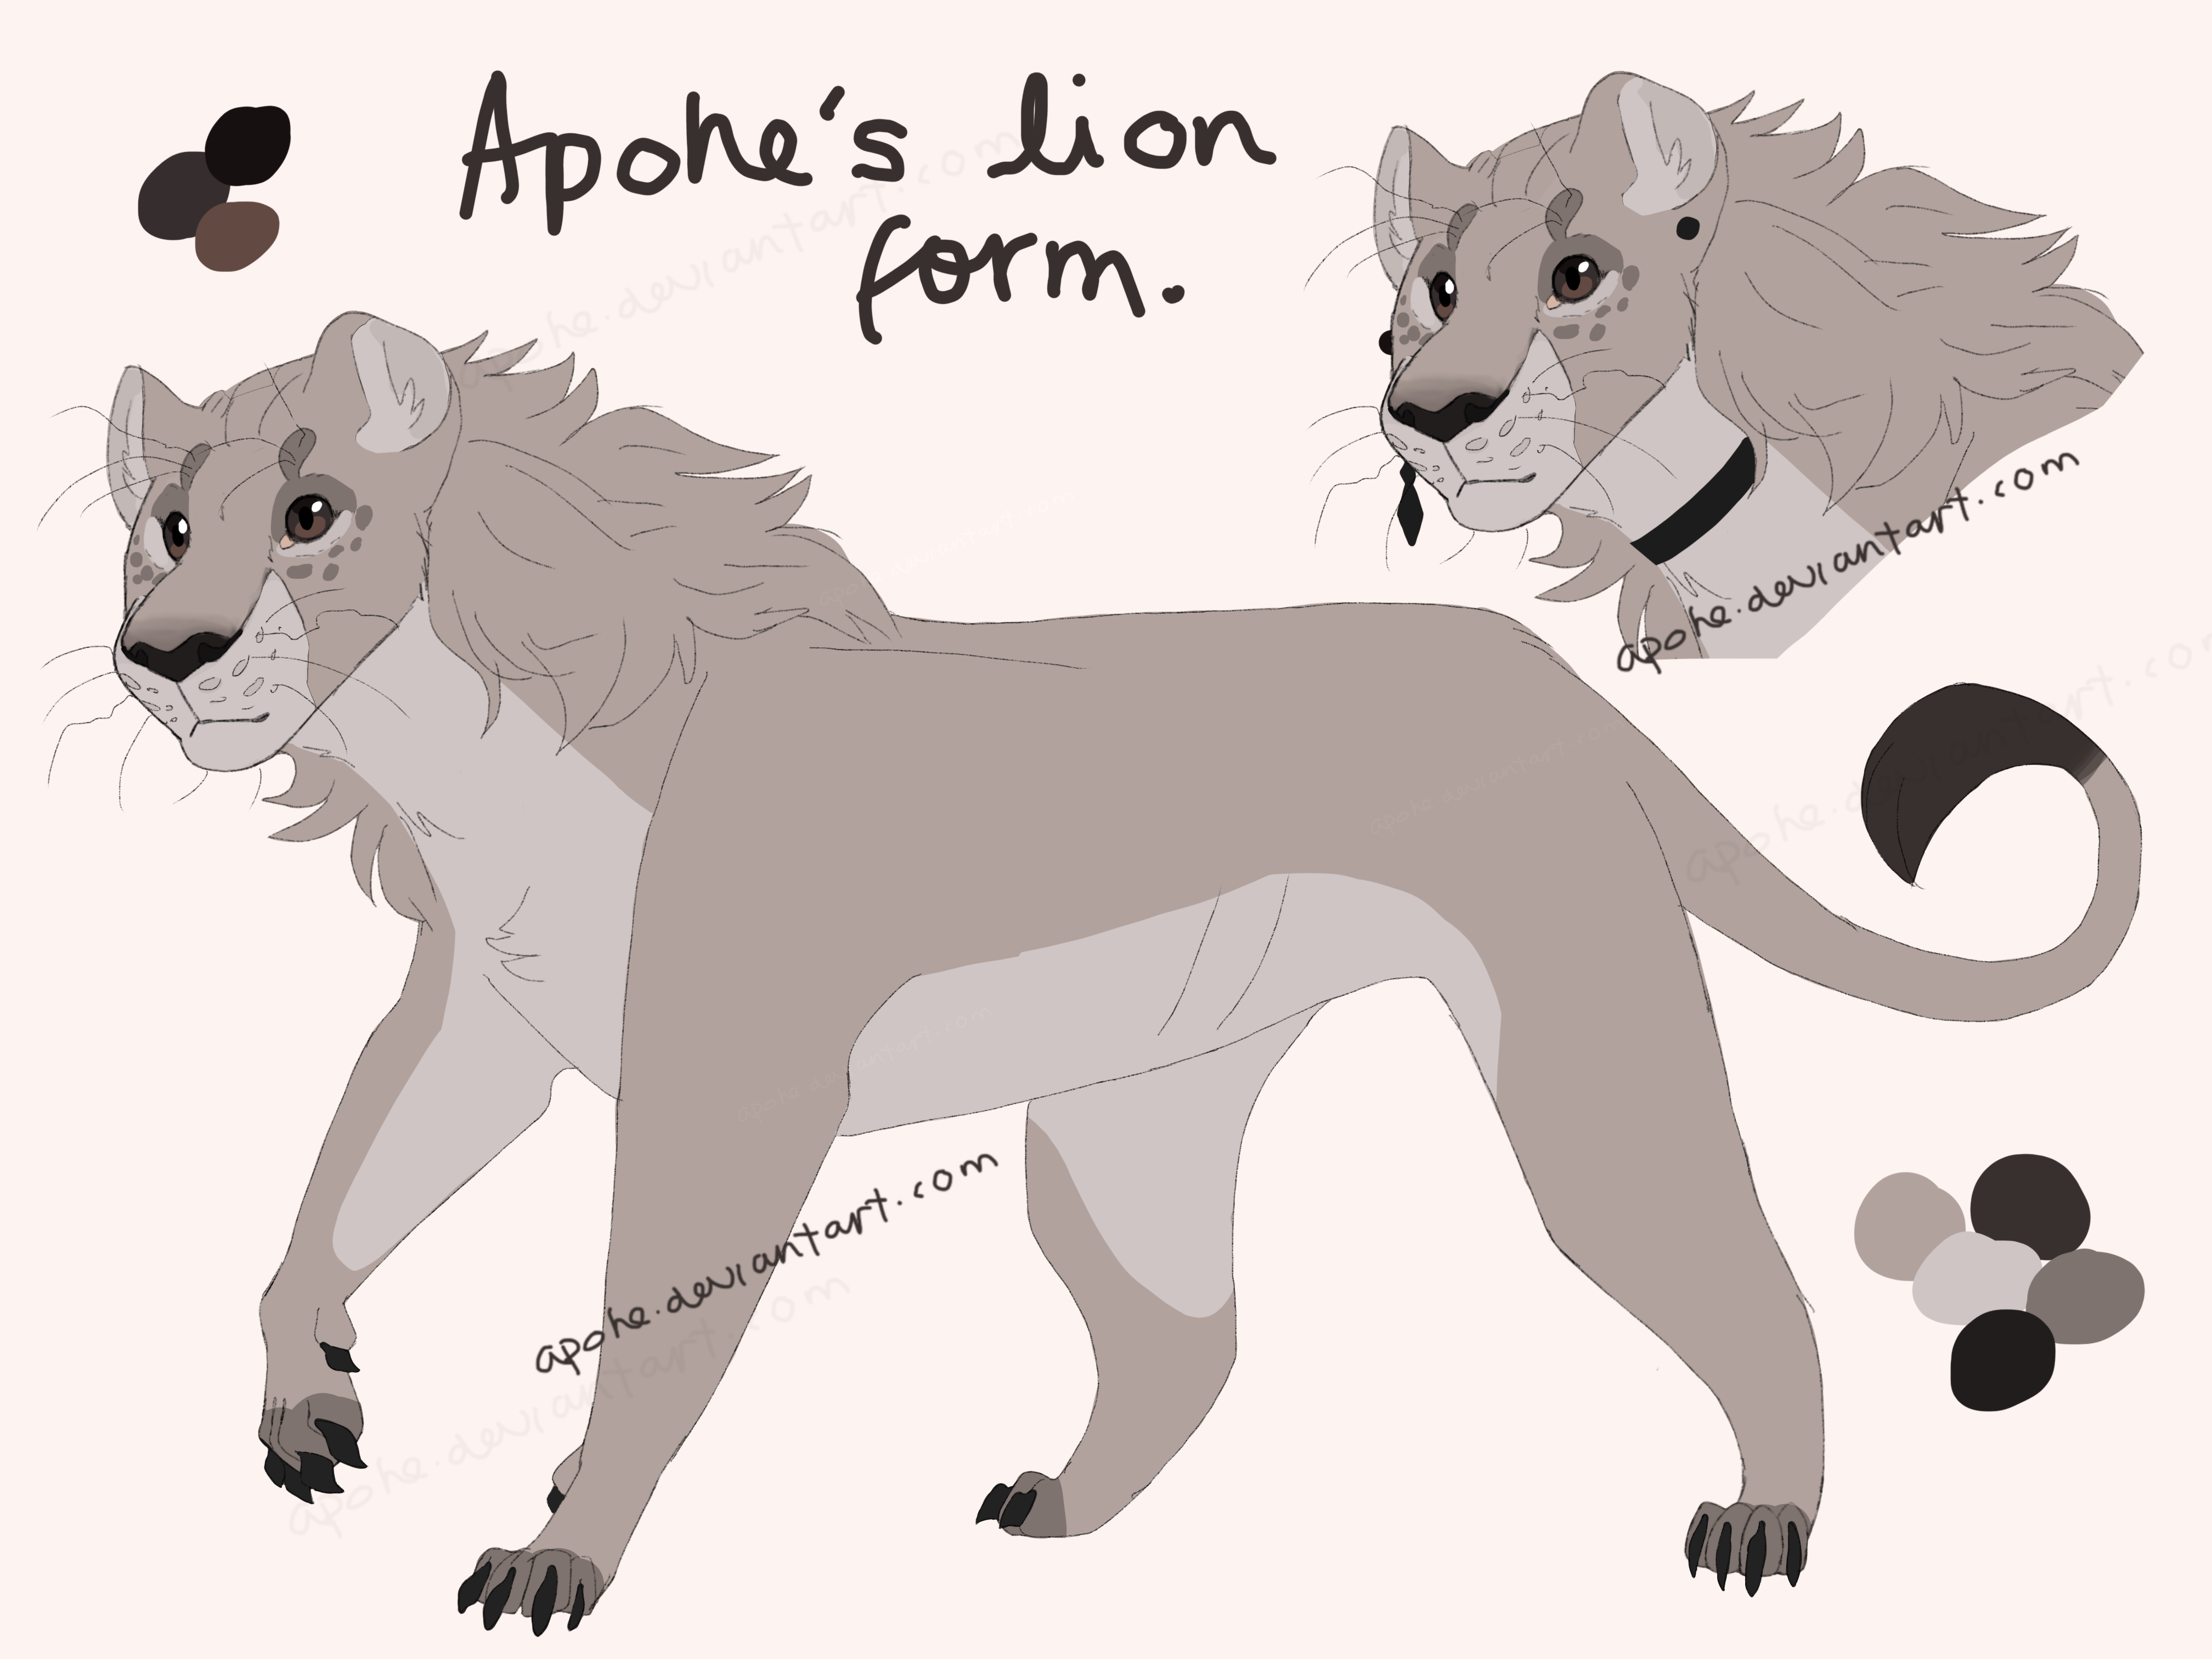 Apohe's Lion form (old)